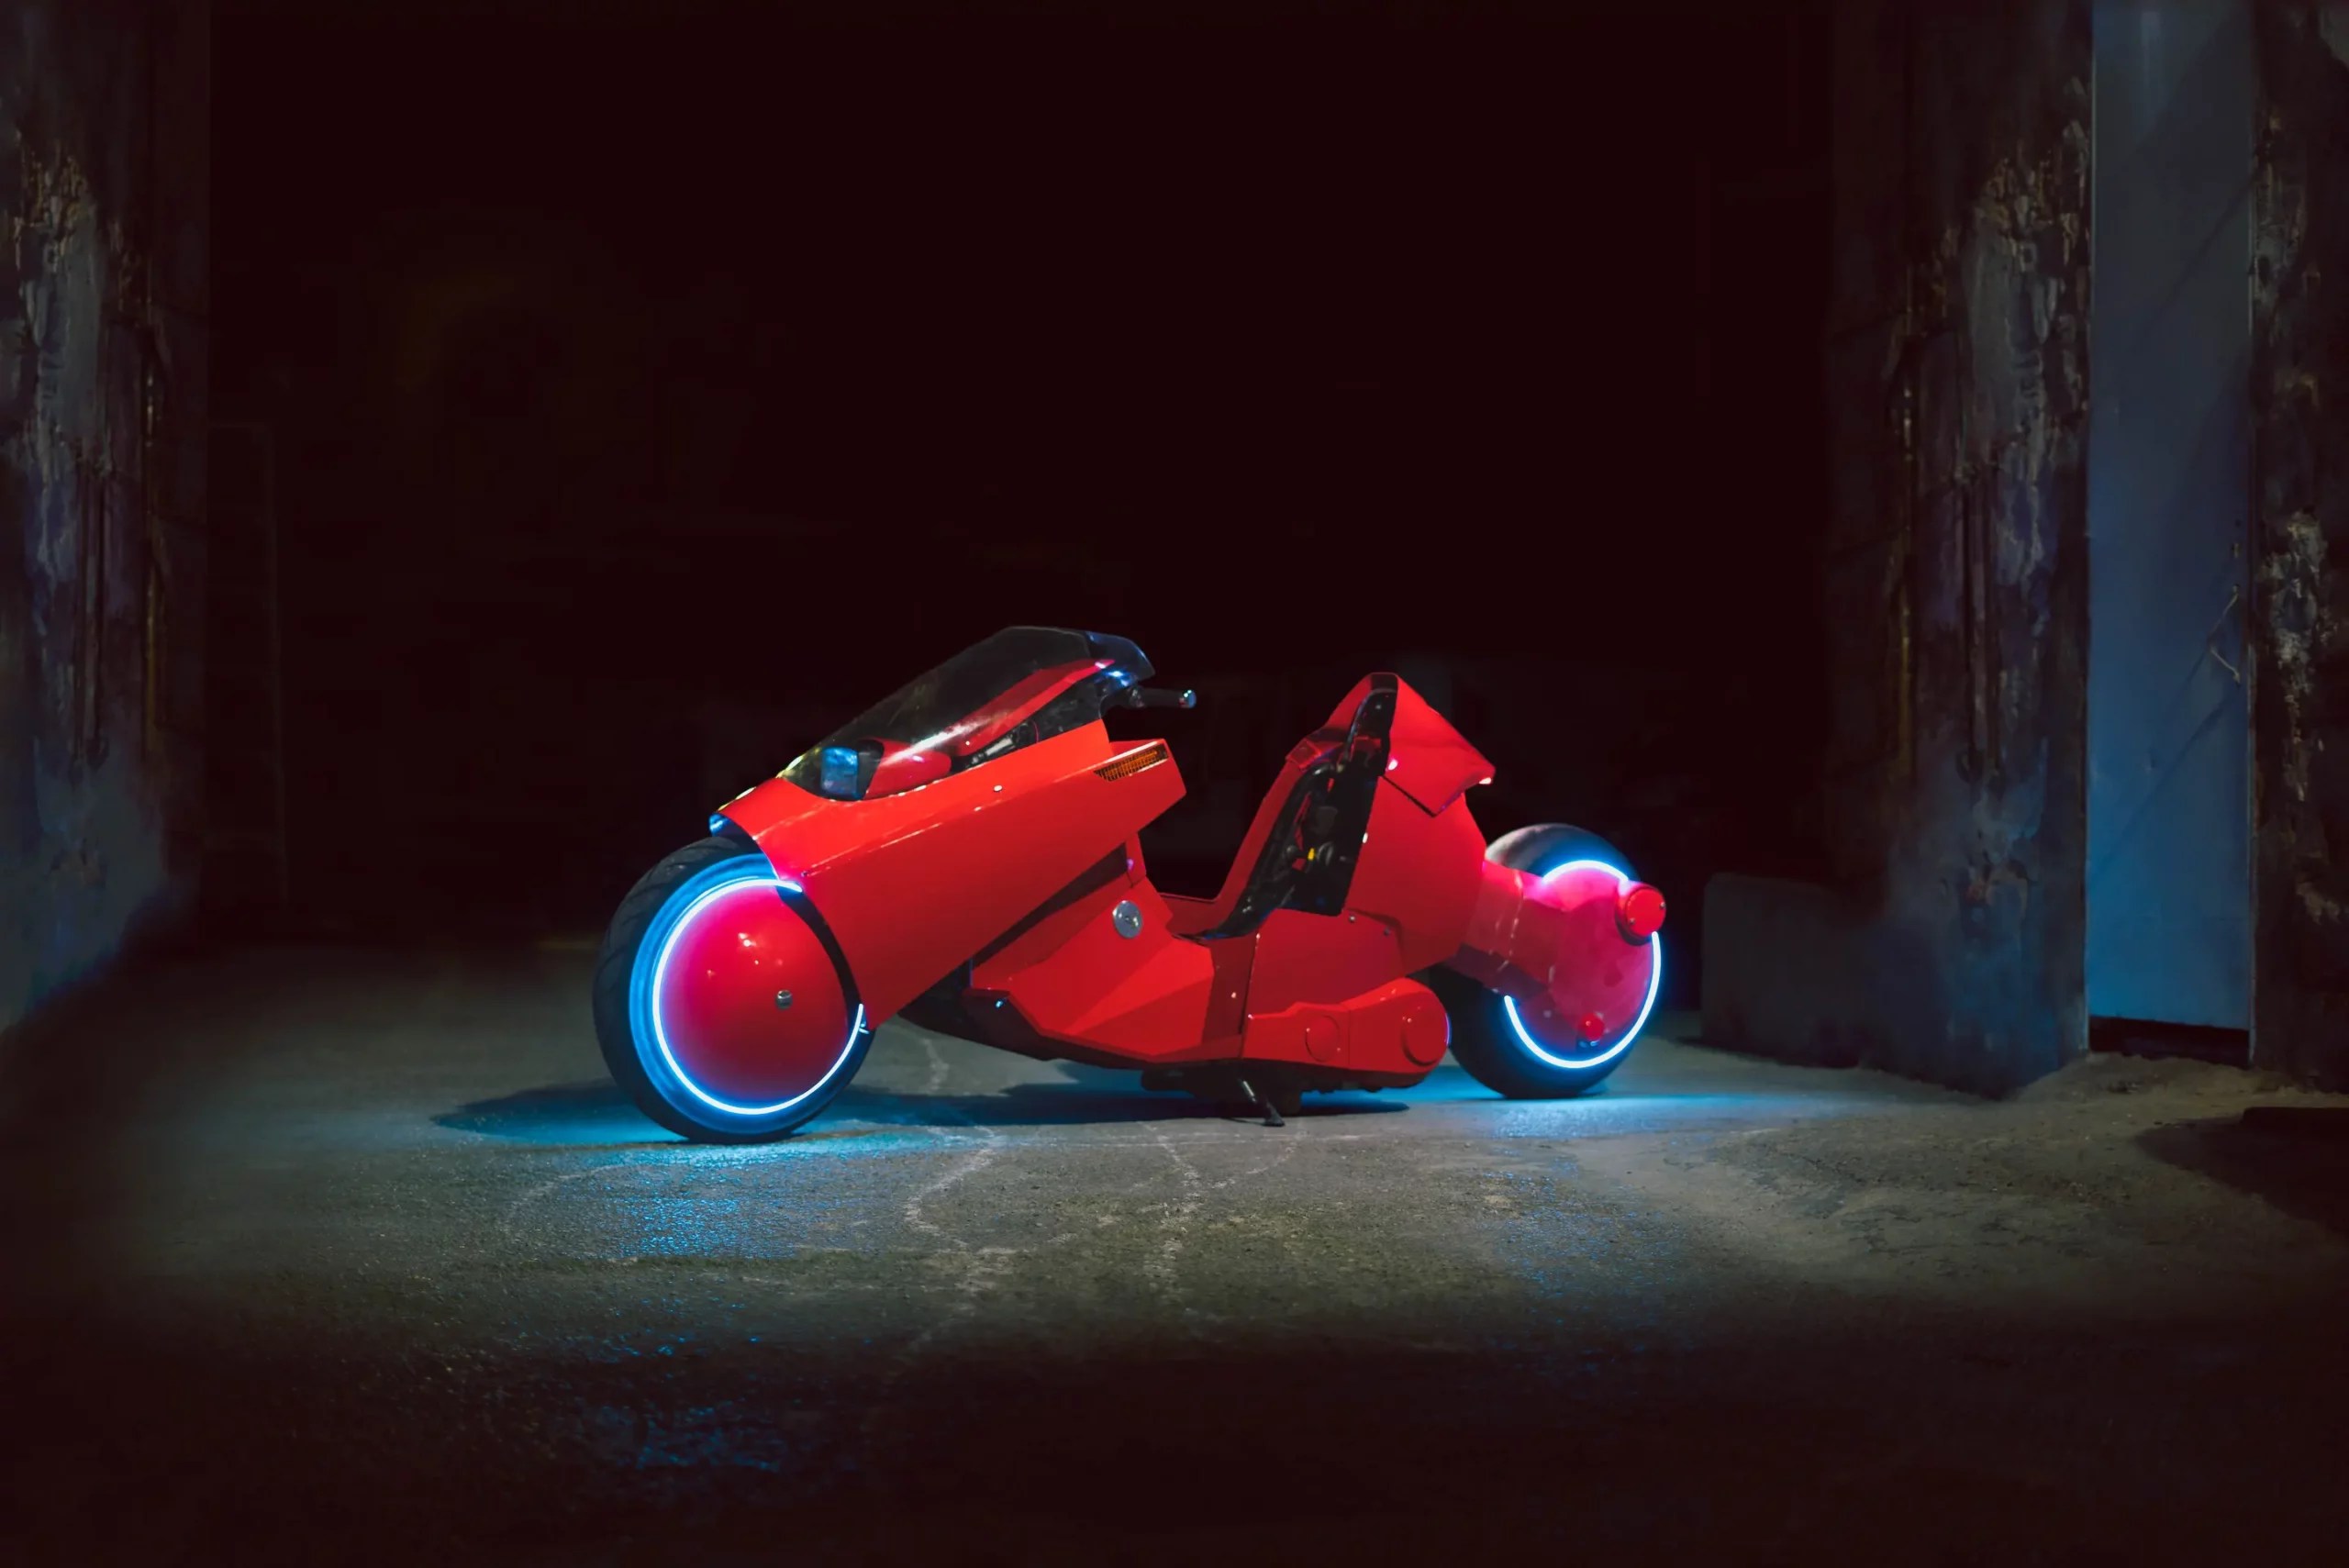 Bel and Bel Unveils Electric Replica Of Iconic Akira Motorcycle